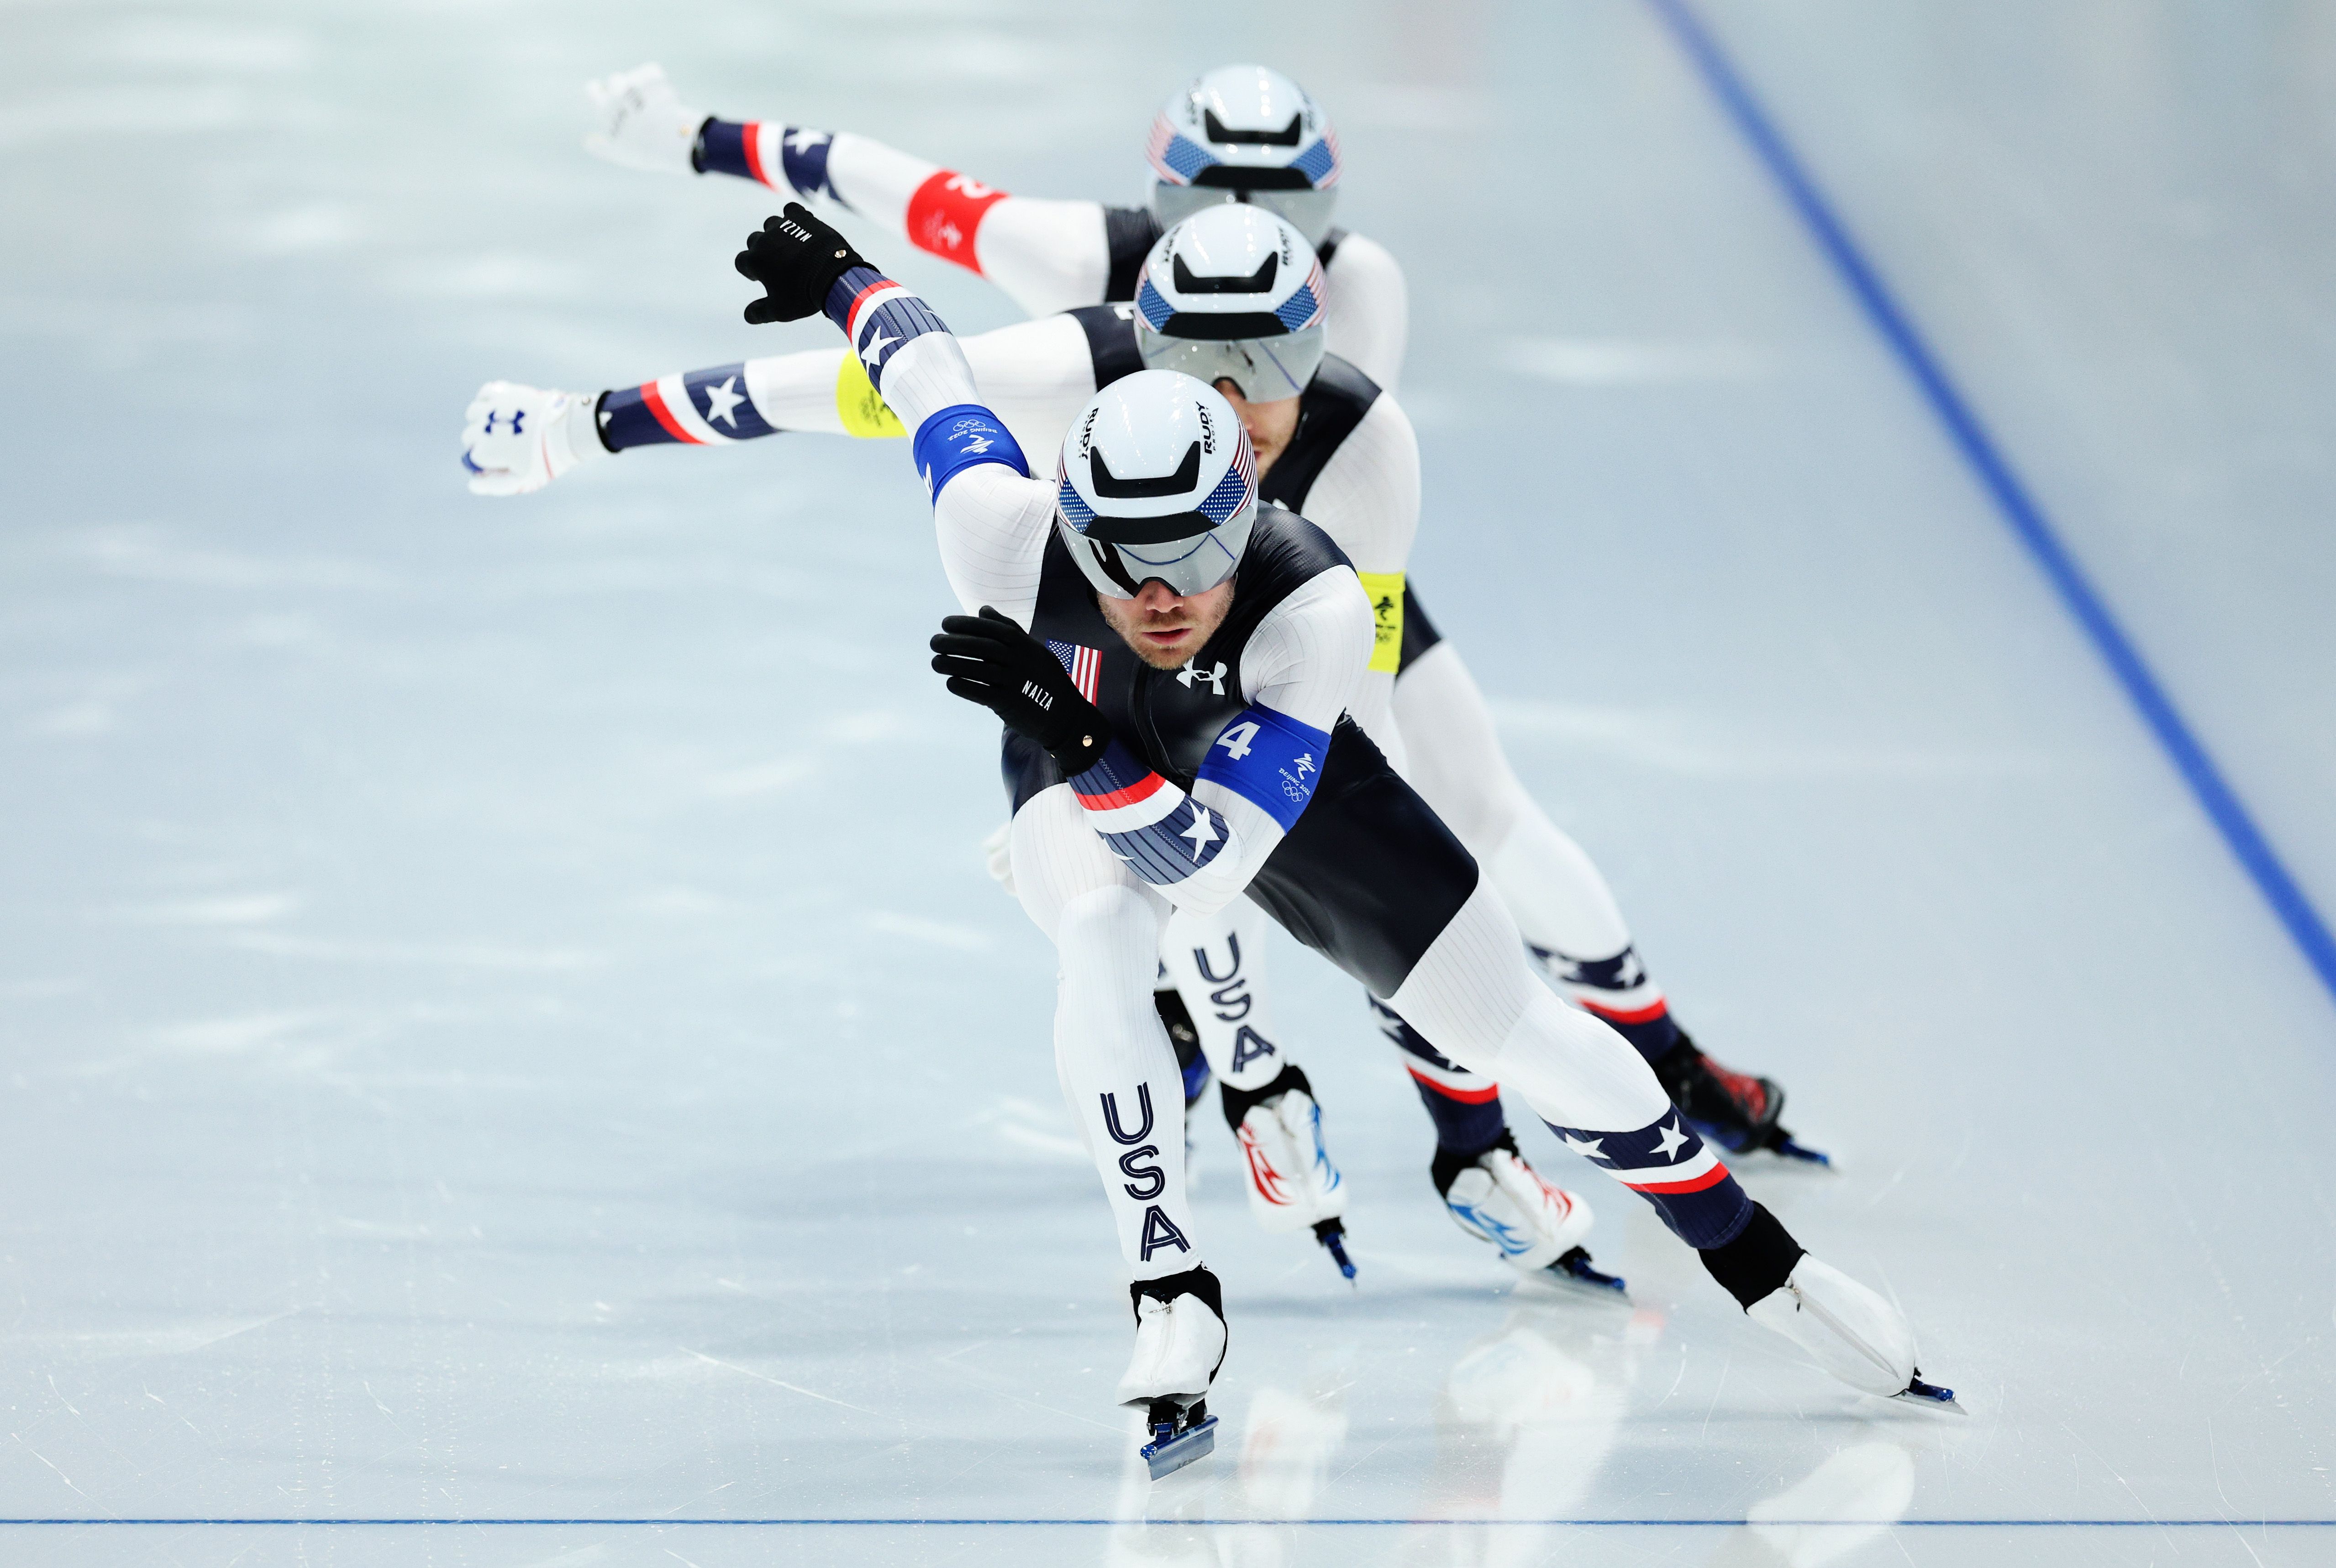 Team United States skate during the Men's Team Pursuit Final B on day eleven of the Beijing 2022 Winter Olympic Games at National Speed Skating Oval on February 15, 2022 in Beijing, China. 